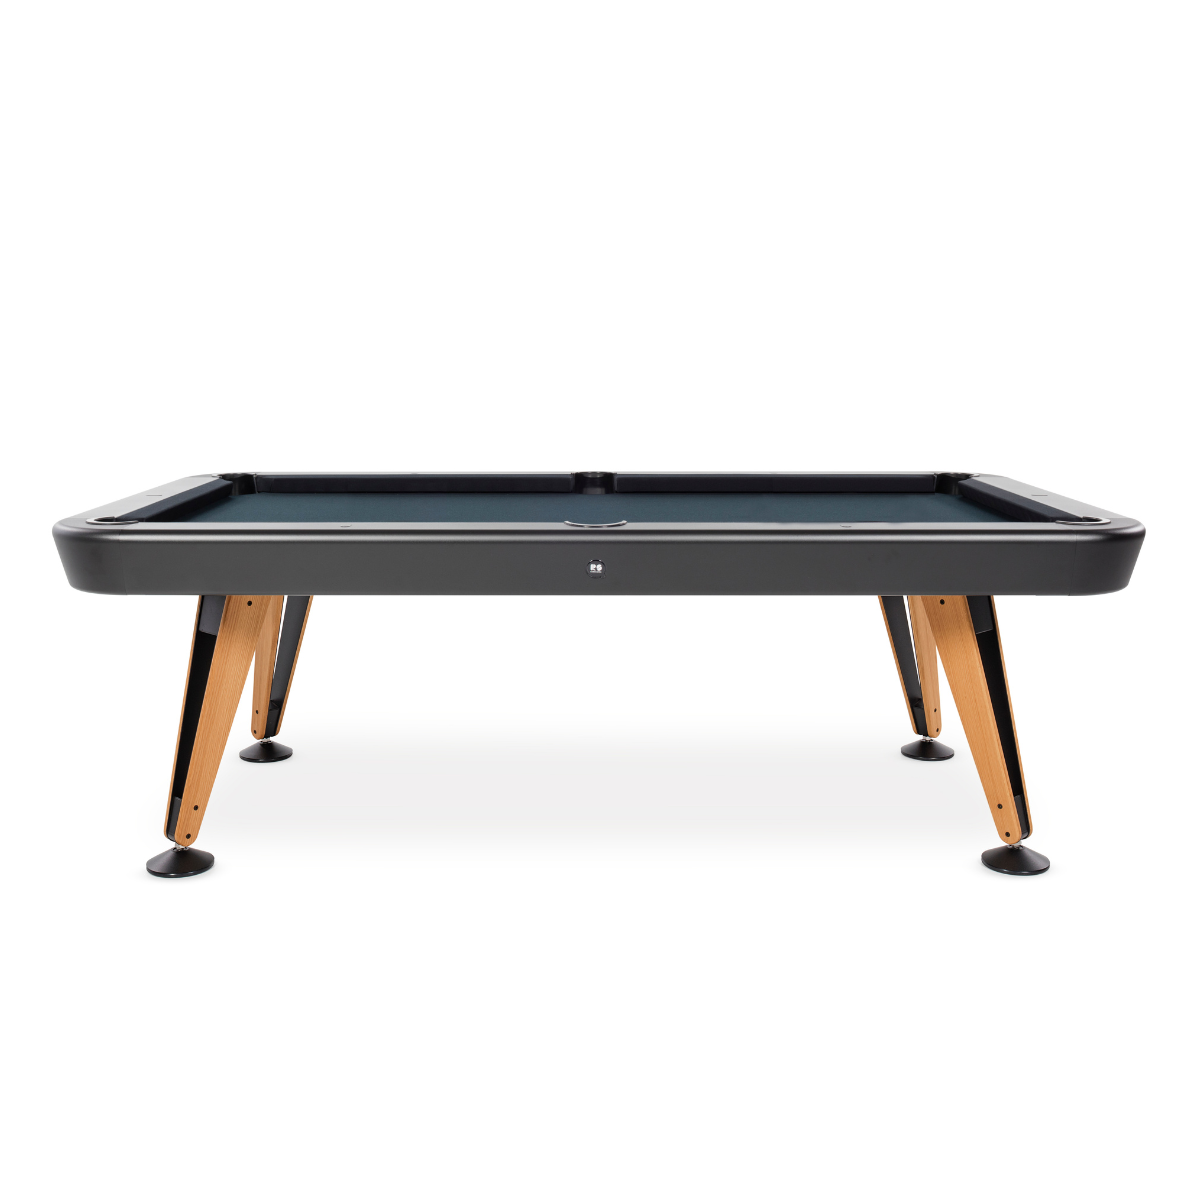 The Diagonal 7ft & 8ft American Pool Table W/Dining Top Option